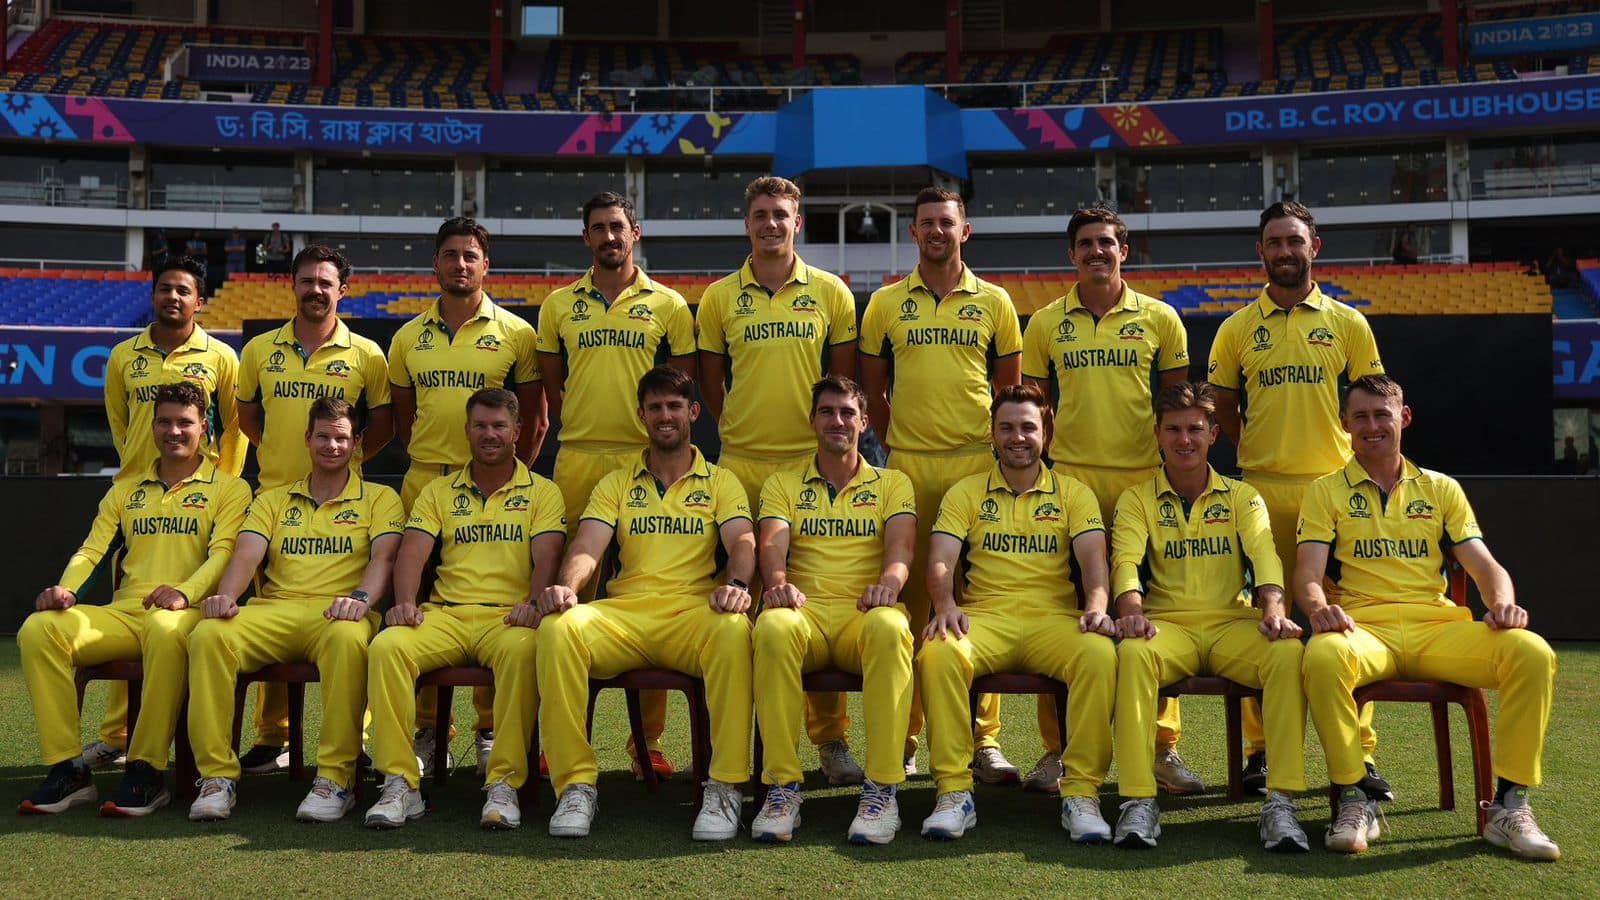 Australia's Celebratory Plans In Disarray As World Cup Champions Face Scheduling Challenges